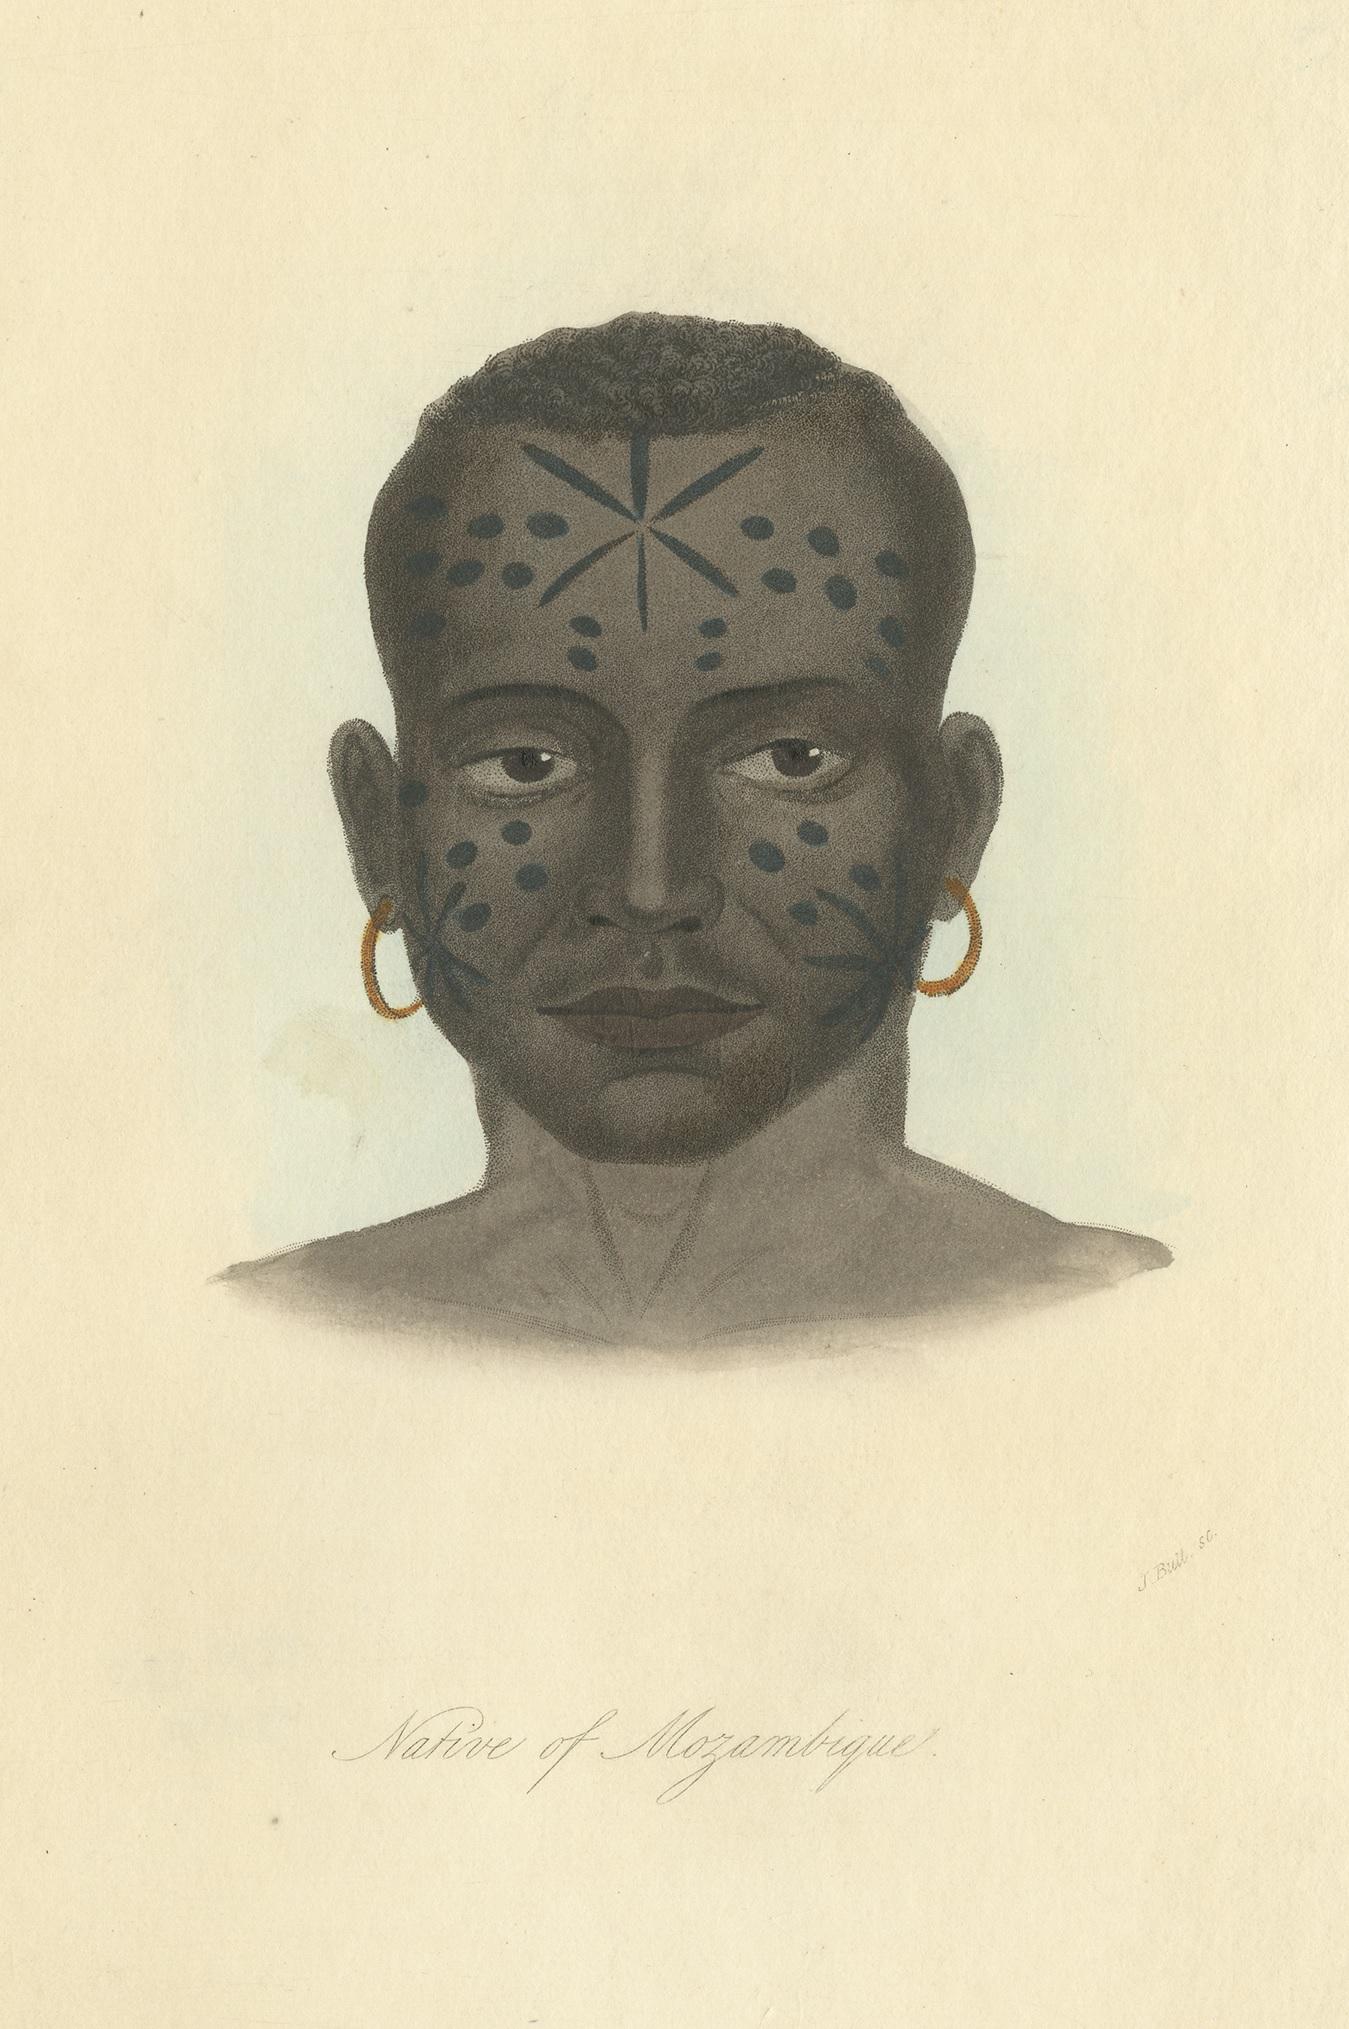 Antique print titled 'Native of Mozambique'. Antique print of a native of Mozambique with earrings and face painting. This print originates from 'Natural History of Man' by J.C. Prichard. A wonderful series of portraits of natives from around the